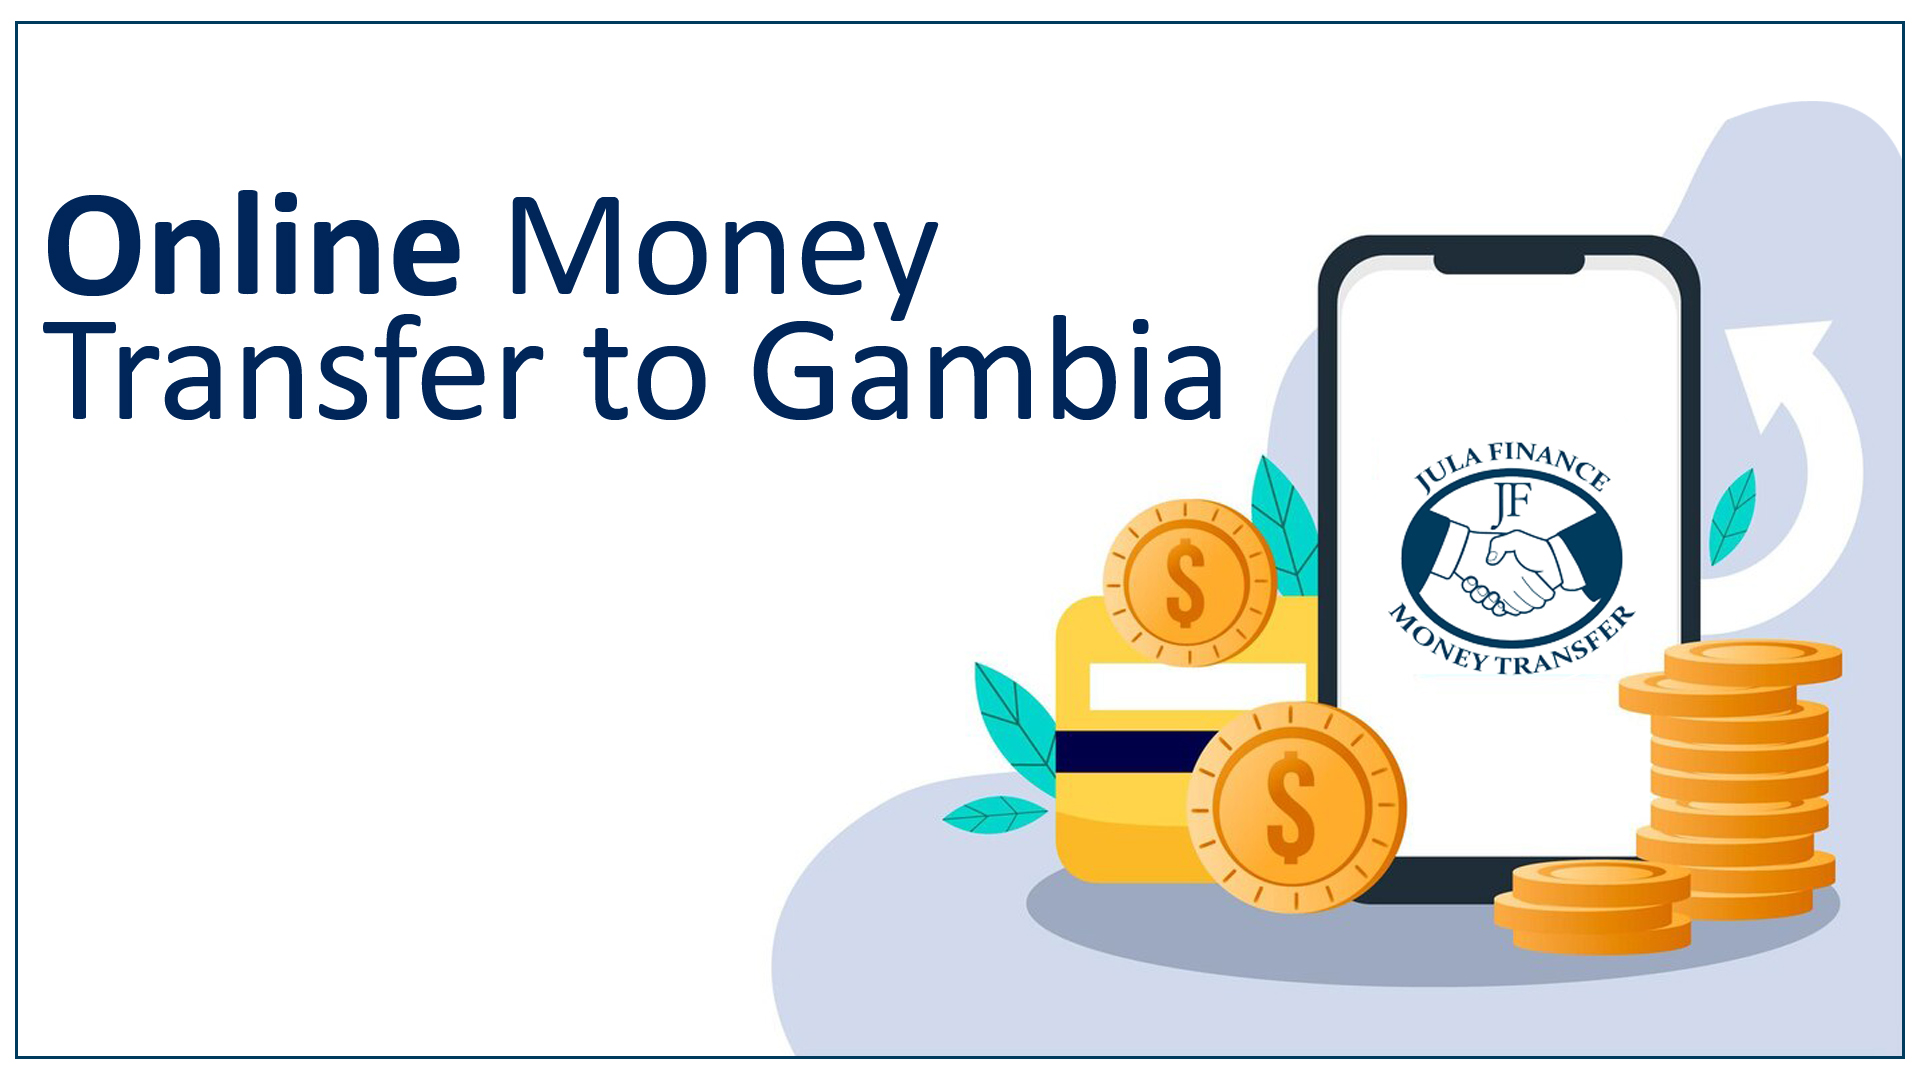 Online Money Transfer to Gambia